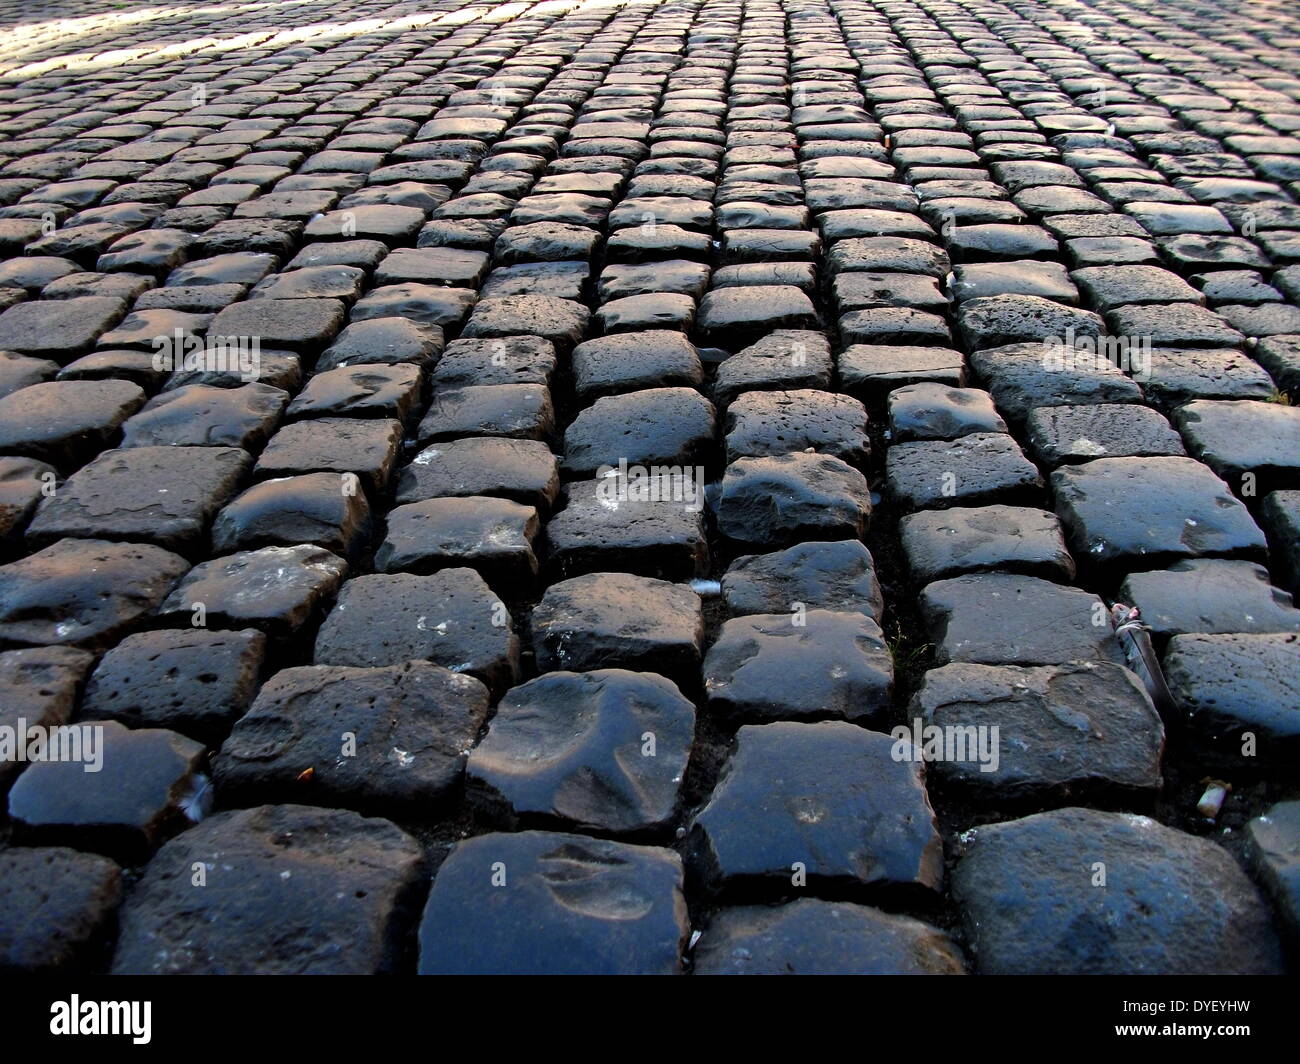 Cobbled stone floor detail from the entrance/courtyard to the Capitolini museums, in Rome, Italy. The museums themselves are contained within 3 palazzi as per designs by Michelangelo Buonarroti in 1536, they were then built over a 400 year period. Stock Photo